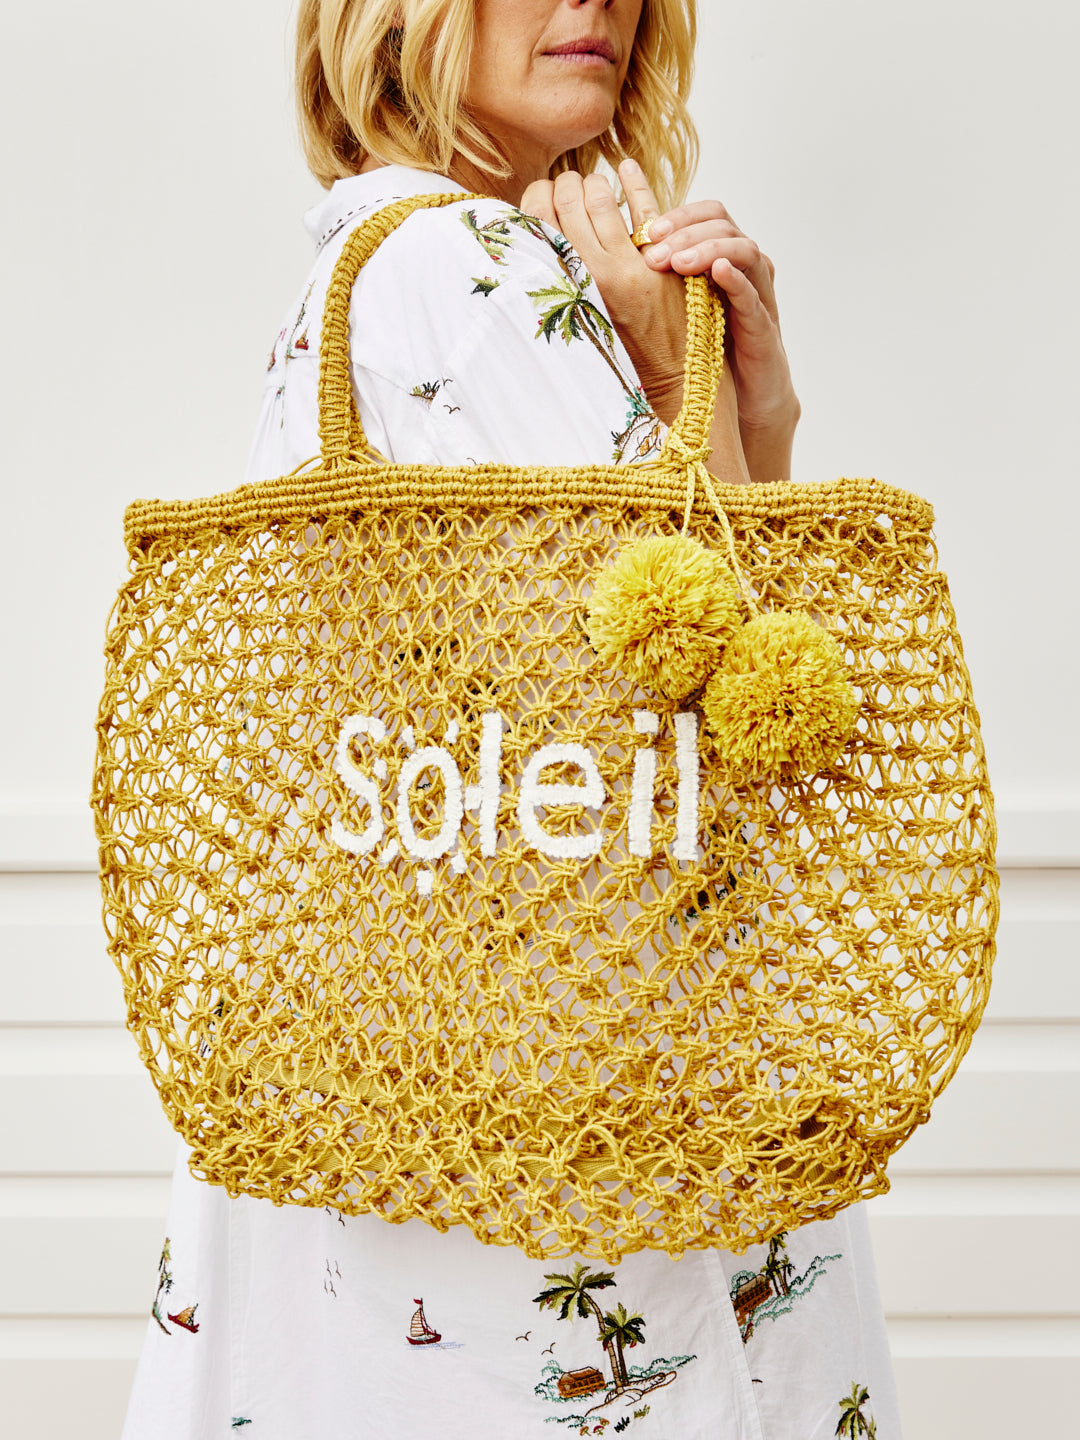 Macramé Tote - Soleil with Yellow Poms